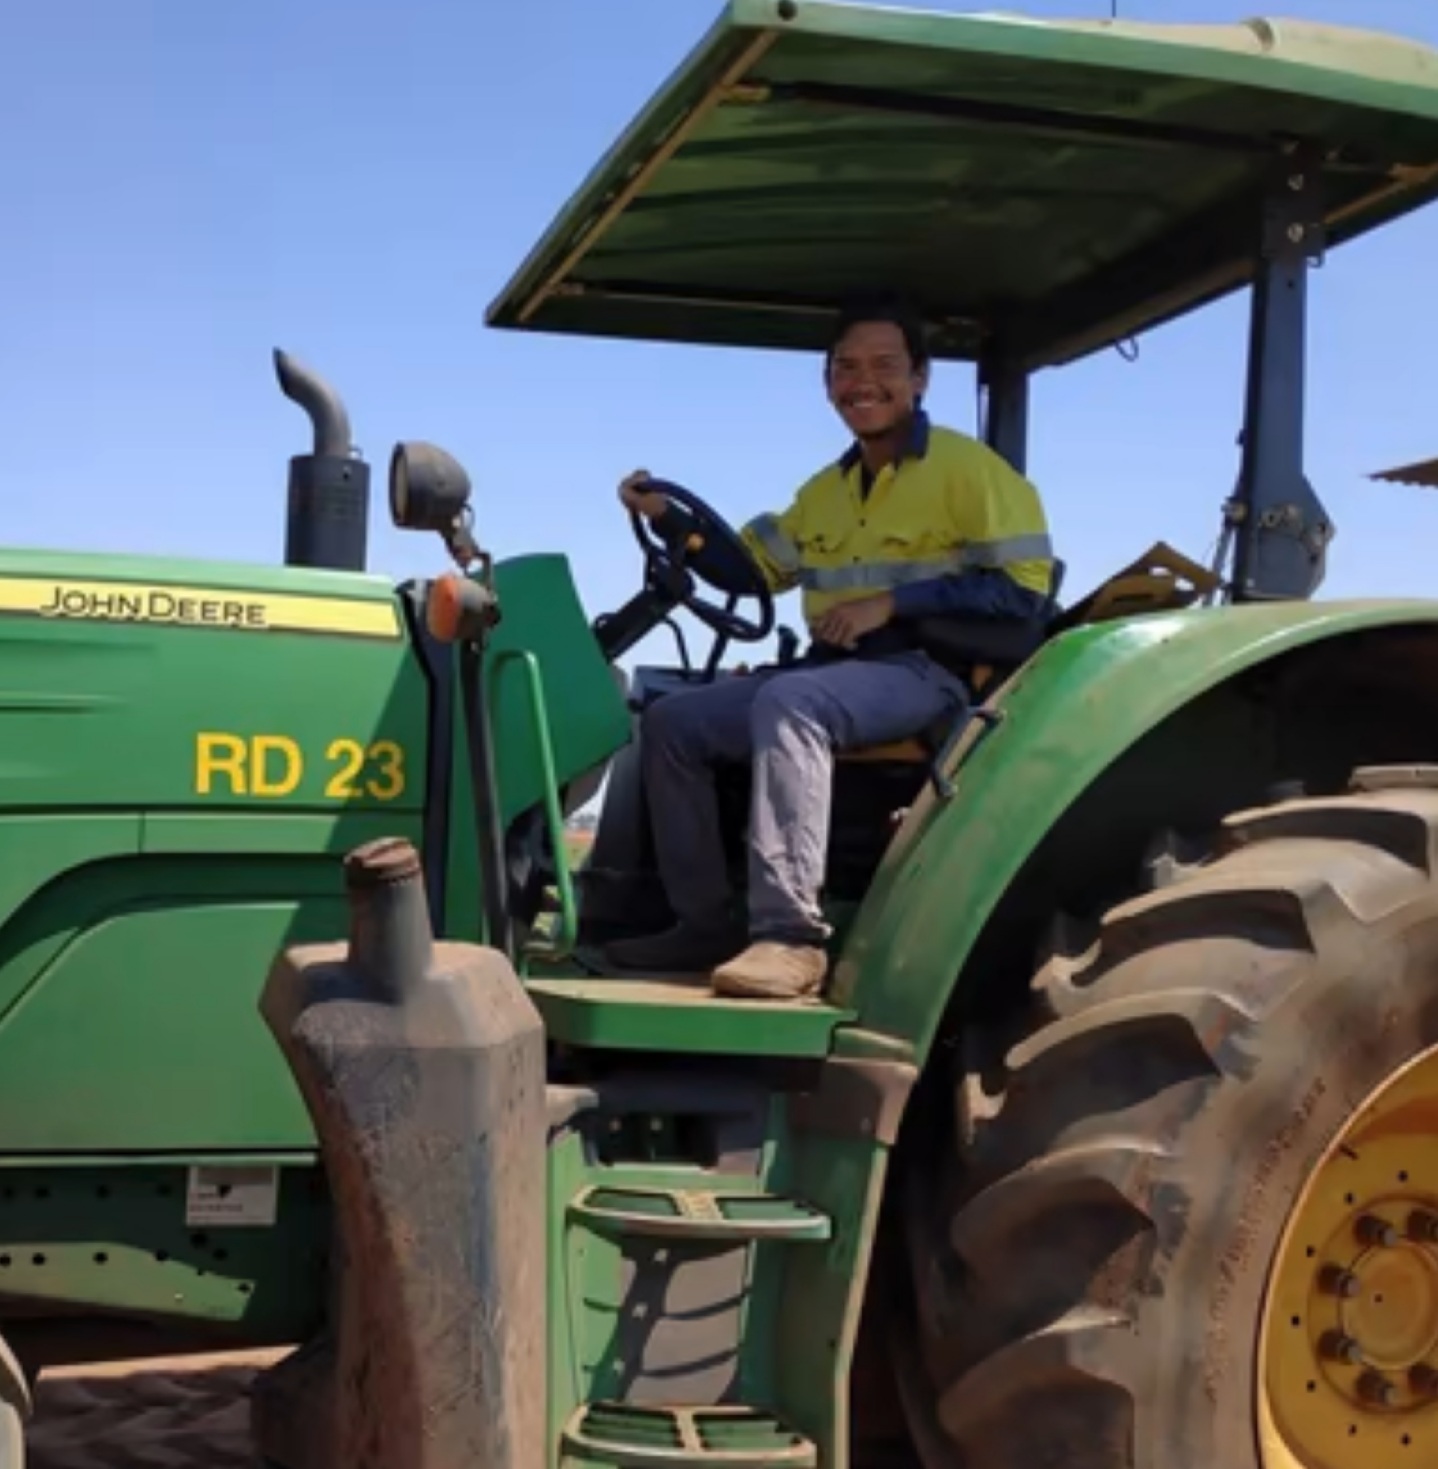 Australia lures Asians to farm labour with new agriculture visa and path to permanent residency